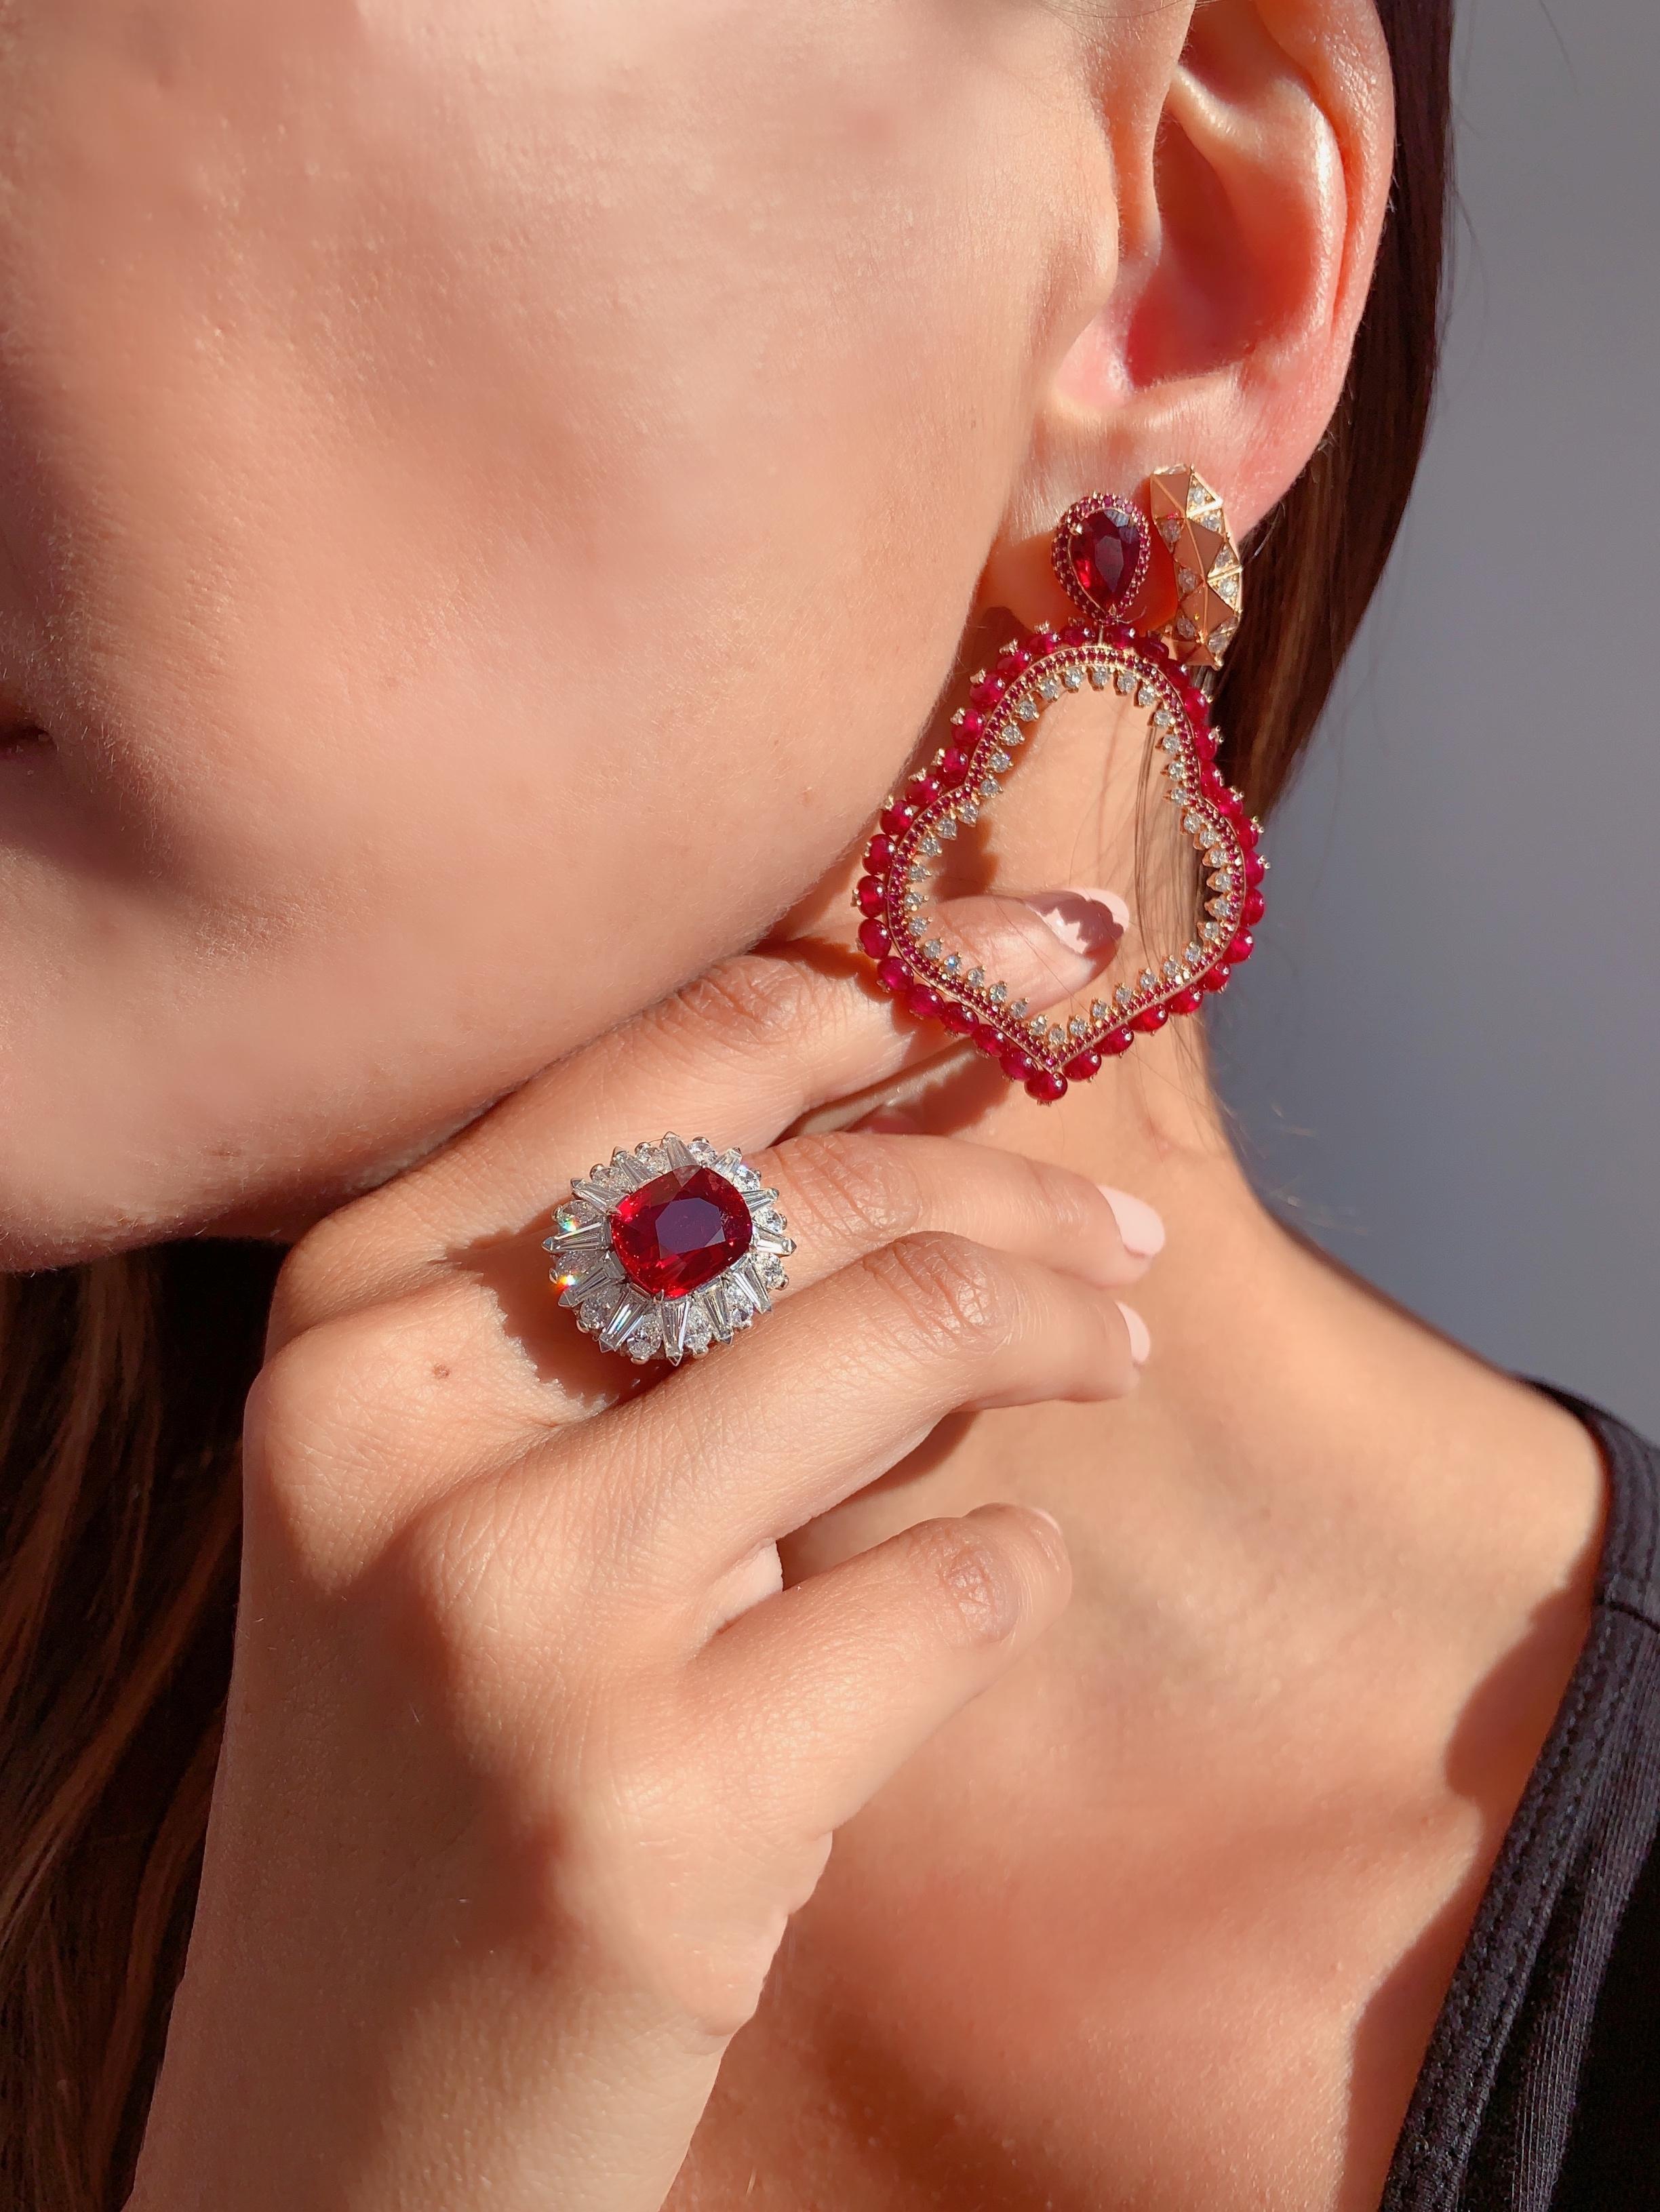 A Pair of Ruby and Diamond Gold Earrings by Jewelry Designer, Sarah Ho.

These Ruby earrings have pear cut rubies 'reimagined' from an old piece, at 1.67ct each. They are set in 18kt rose gold with an additional 26.68ct of rubies and 2.01ct